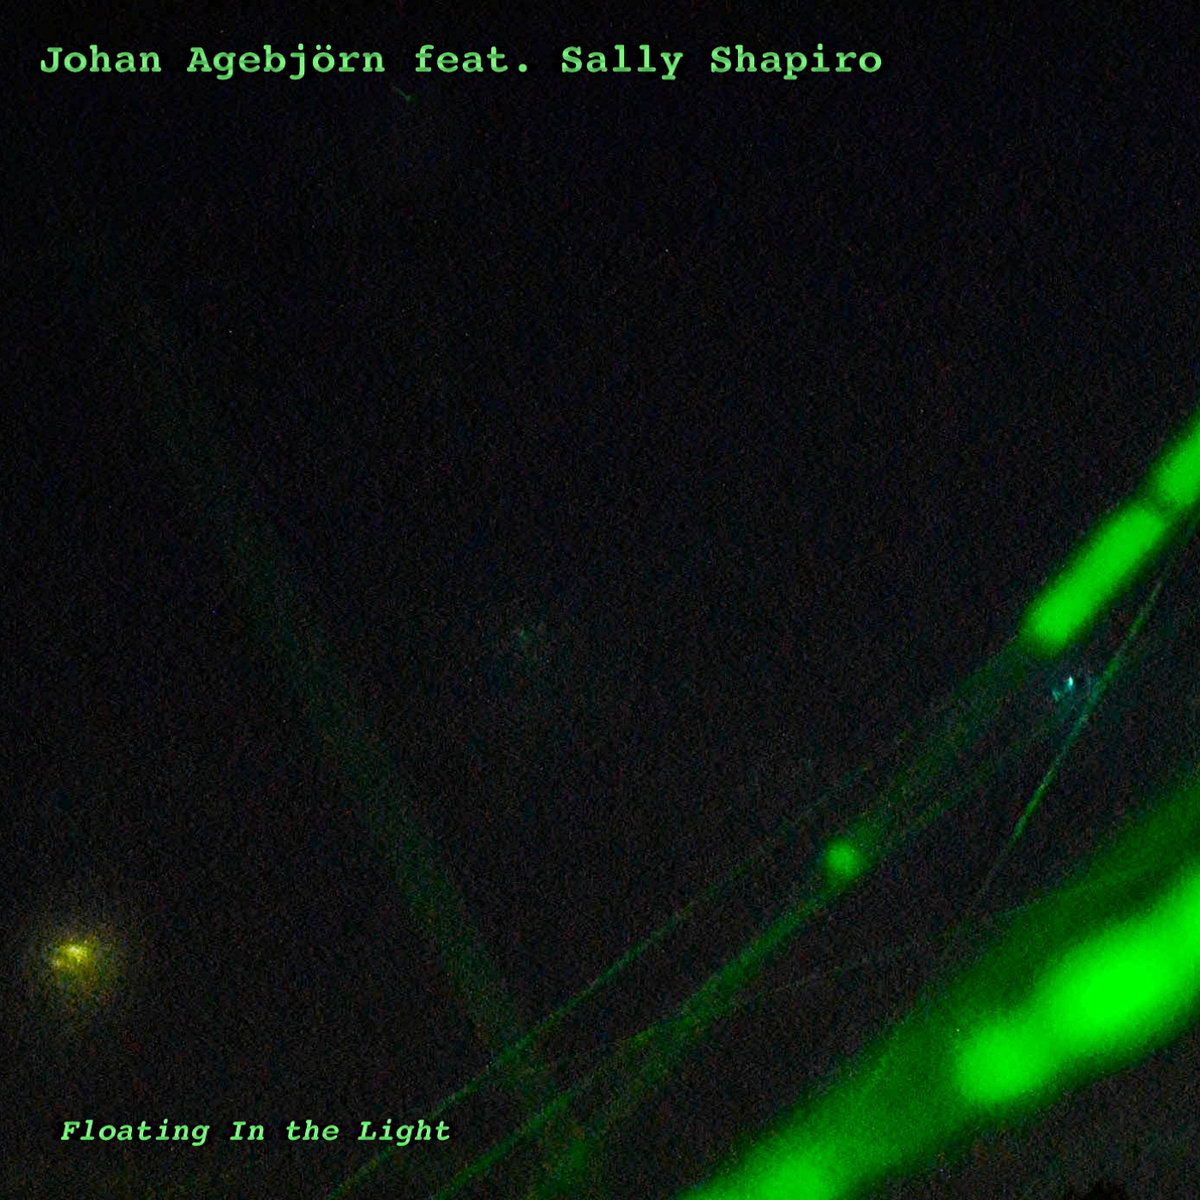 In case you missed: 'Floating In the Light' out now as a semi-official single on my Bandcamp only. A 7-minute progressive electronic hypnosis. agebjorn.bandcamp.com/track/floating…